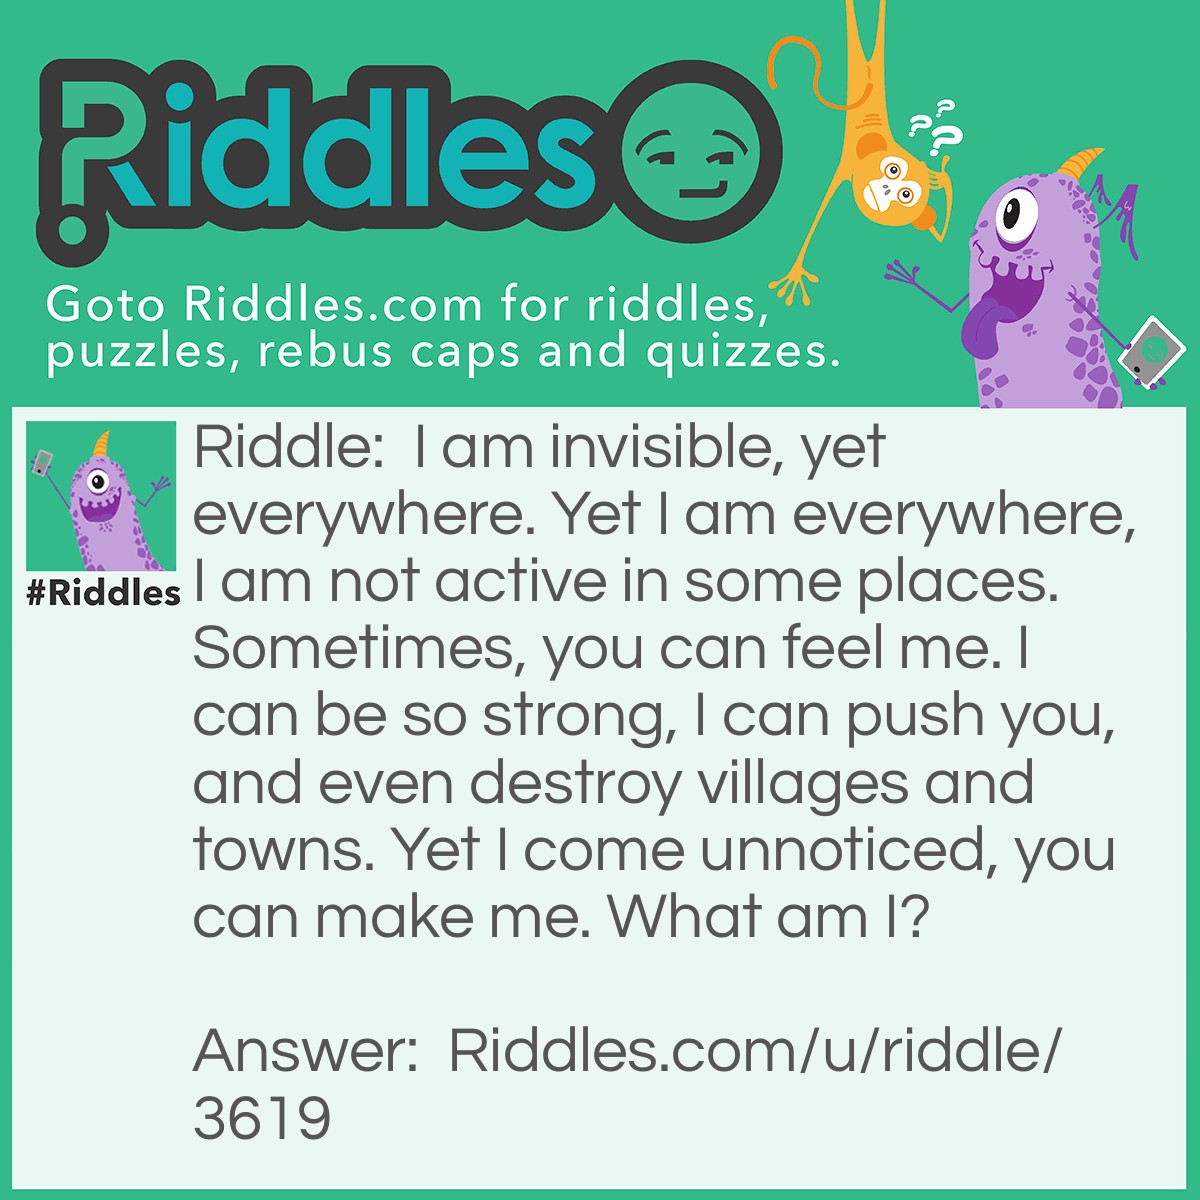 Riddle: I am invisible, yet everywhere. Yet I am everywhere, I am not active in some places. Sometimes, you can feel me. I can be so strong, I can push you, and even destroy villages and towns. Yet I come unnoticed, you can make me. What am I? Answer: The Wind.